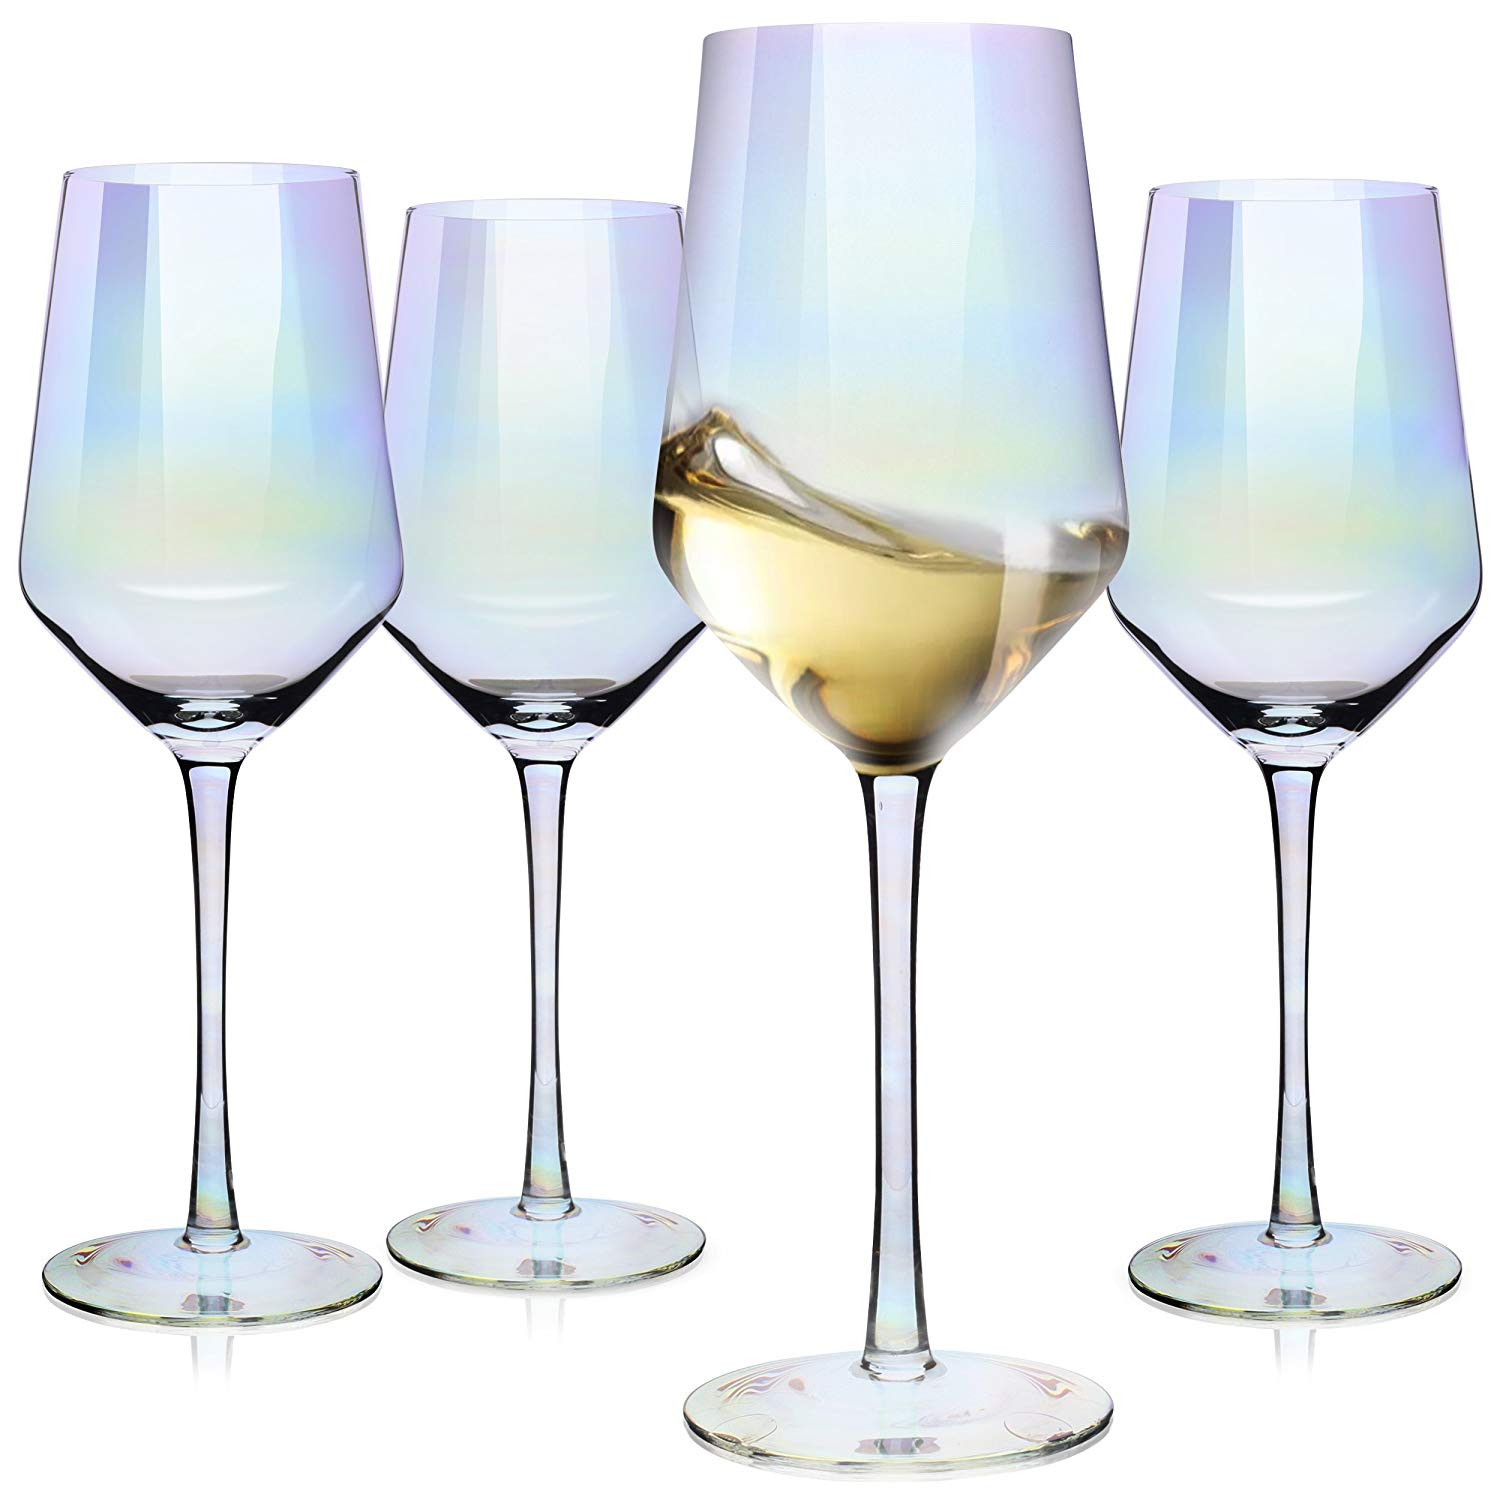 18 Amazing Large Wine Glass Vase 2024 free download large wine glass vase of amazon com wine glasses large red wine or white wine glass set of throughout amazon com wine glasses large red wine or white wine glass set of 4 unique gift for wome